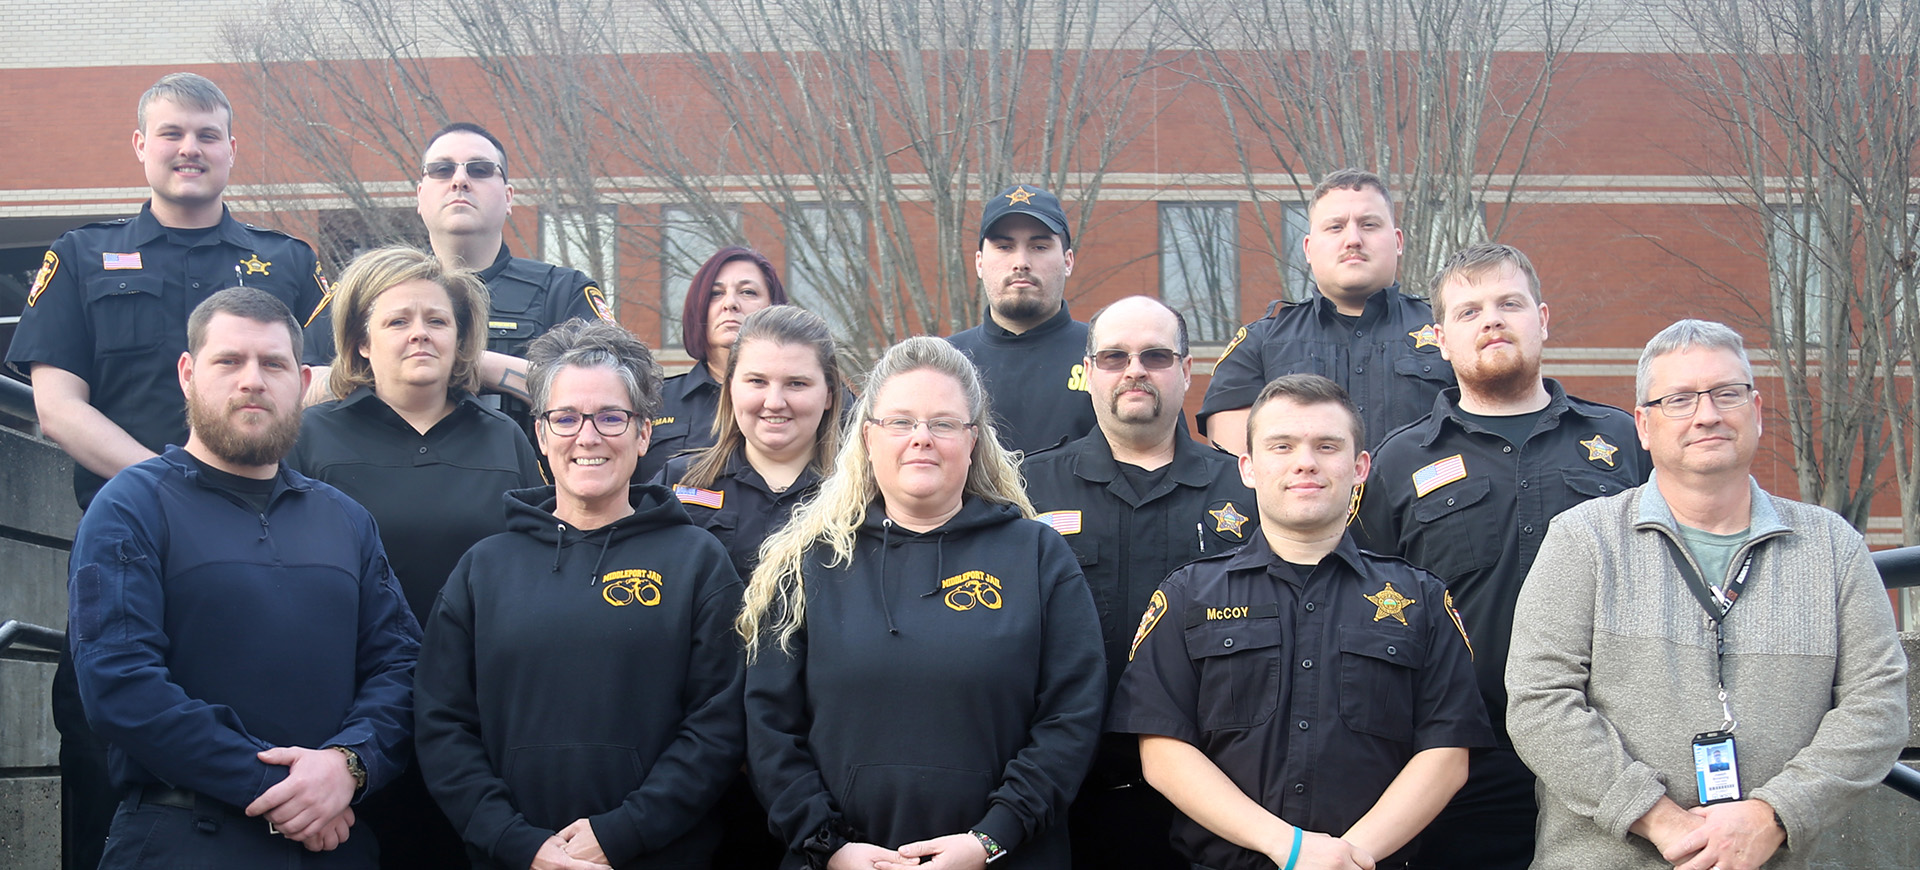 corrections officers from area agencies recently completed the Ohio Corrections Officer Basic Training Academy. Shown are front row, left to right: Cody Brooks, Rebecca Carson, Tara Spaun, DaKota McCoy, and WSCC POBA Commander and Director of Public Safety Joseph Browning. Second row, left to right: Tabitha Schafer, Kaleigh Hinton, David Oliver, and Kyle Sisson. Back row, left to right: Matthew Borman, Joshua Cummings, Traci Chapman, Justice Klusty, and Adam Blackstone.